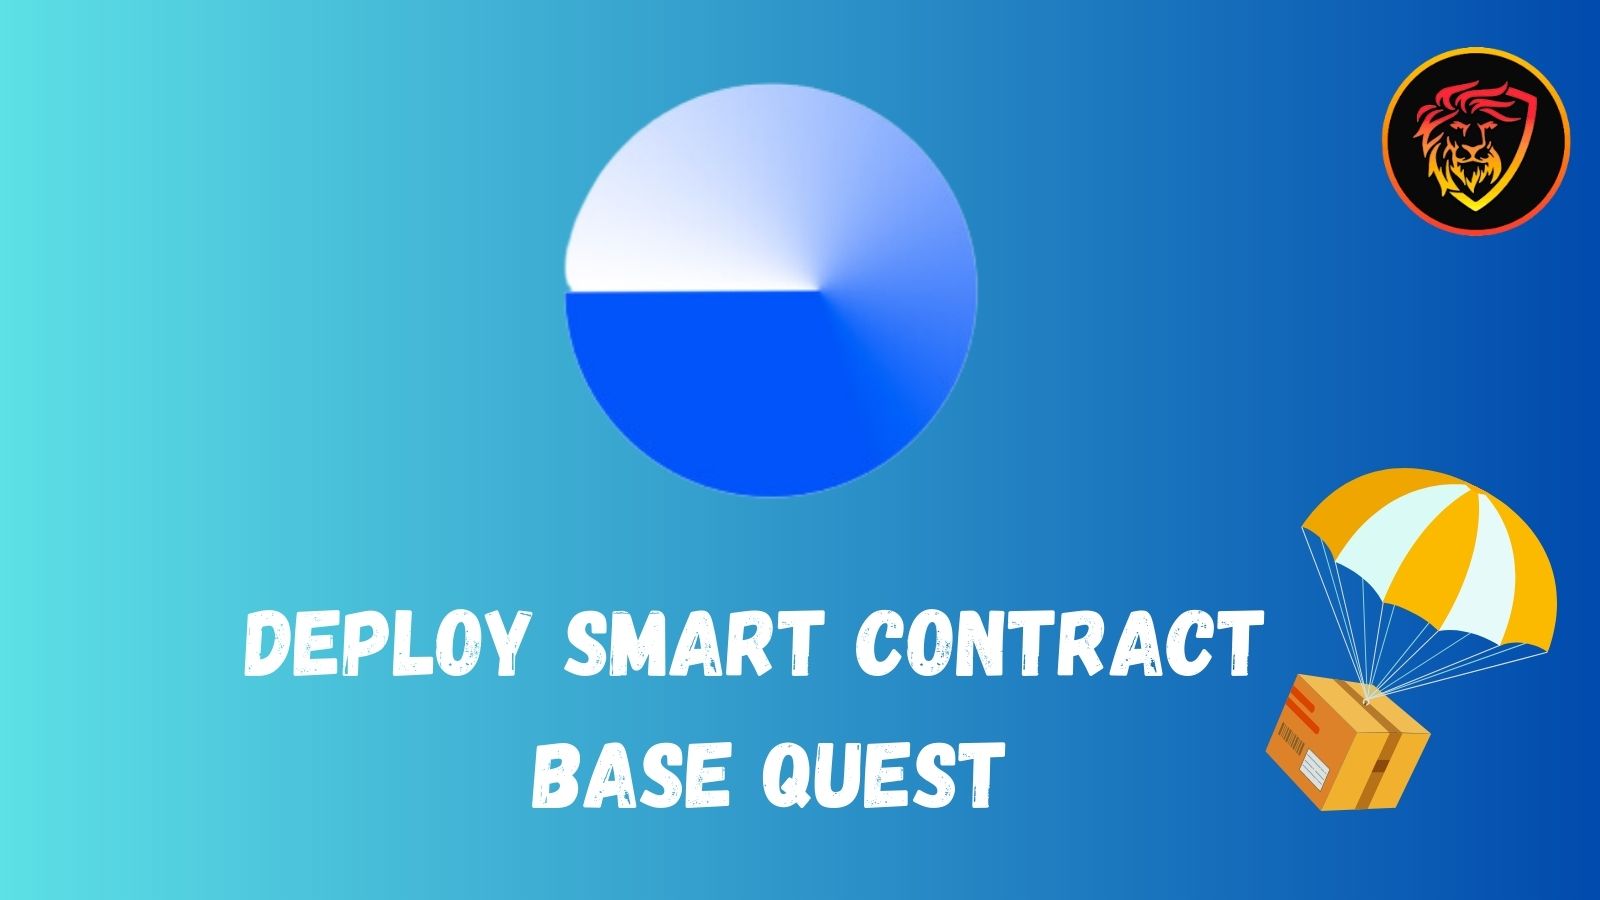 base quest contract.jpg